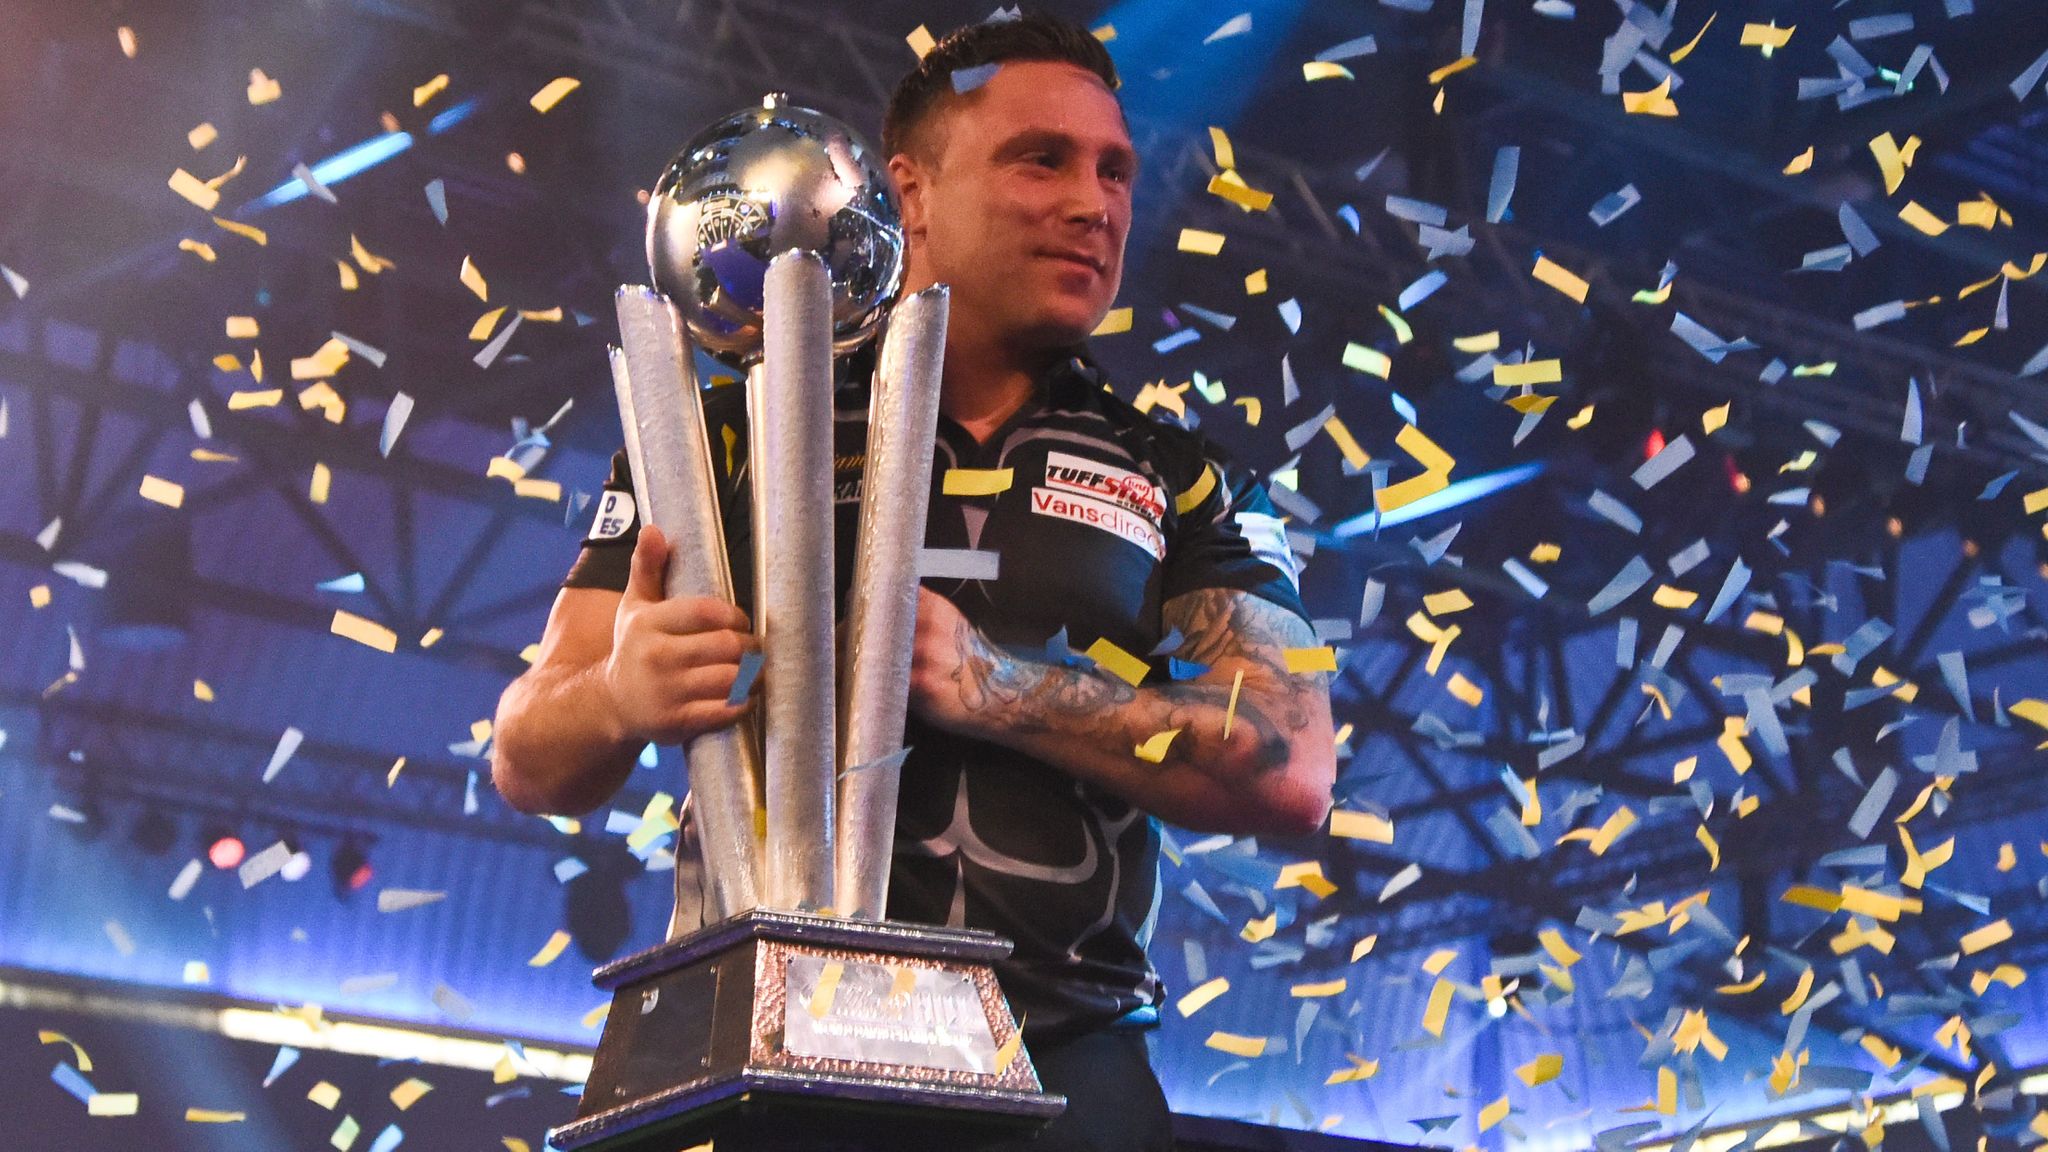 DC World Darts Championship 2022: Fixtures, draw, and schedule